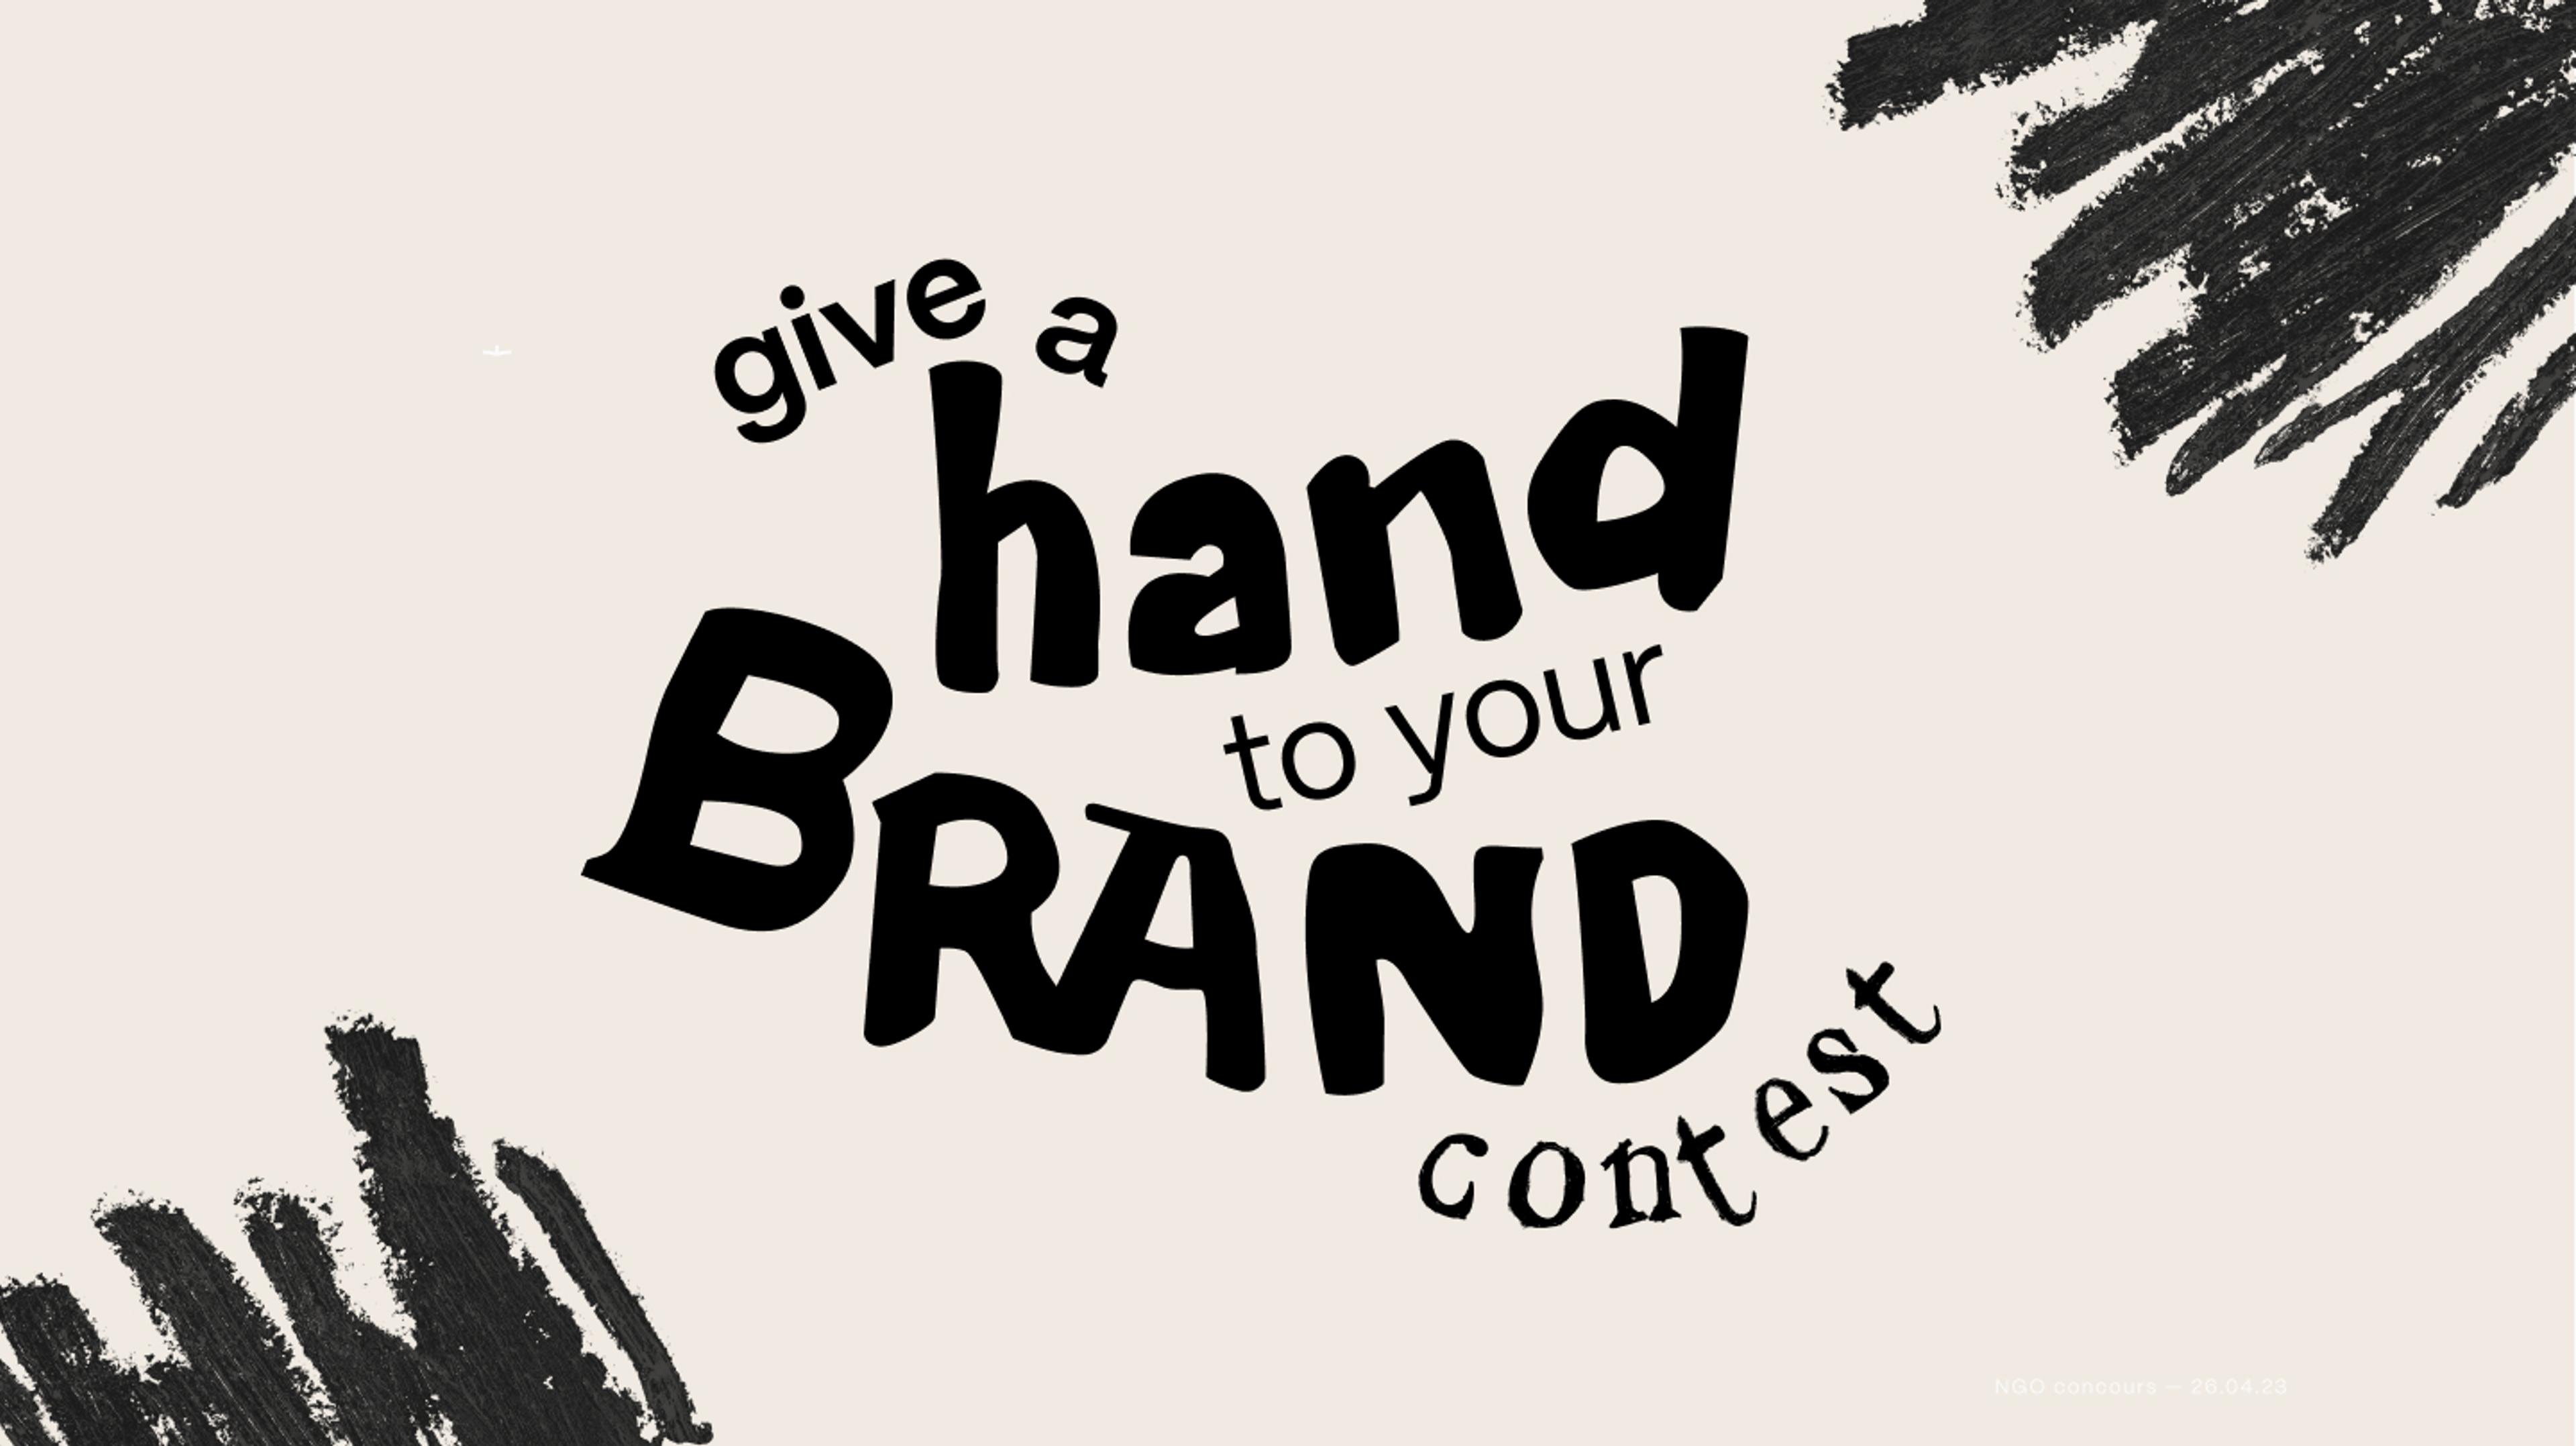 give a hand to your brand contest design